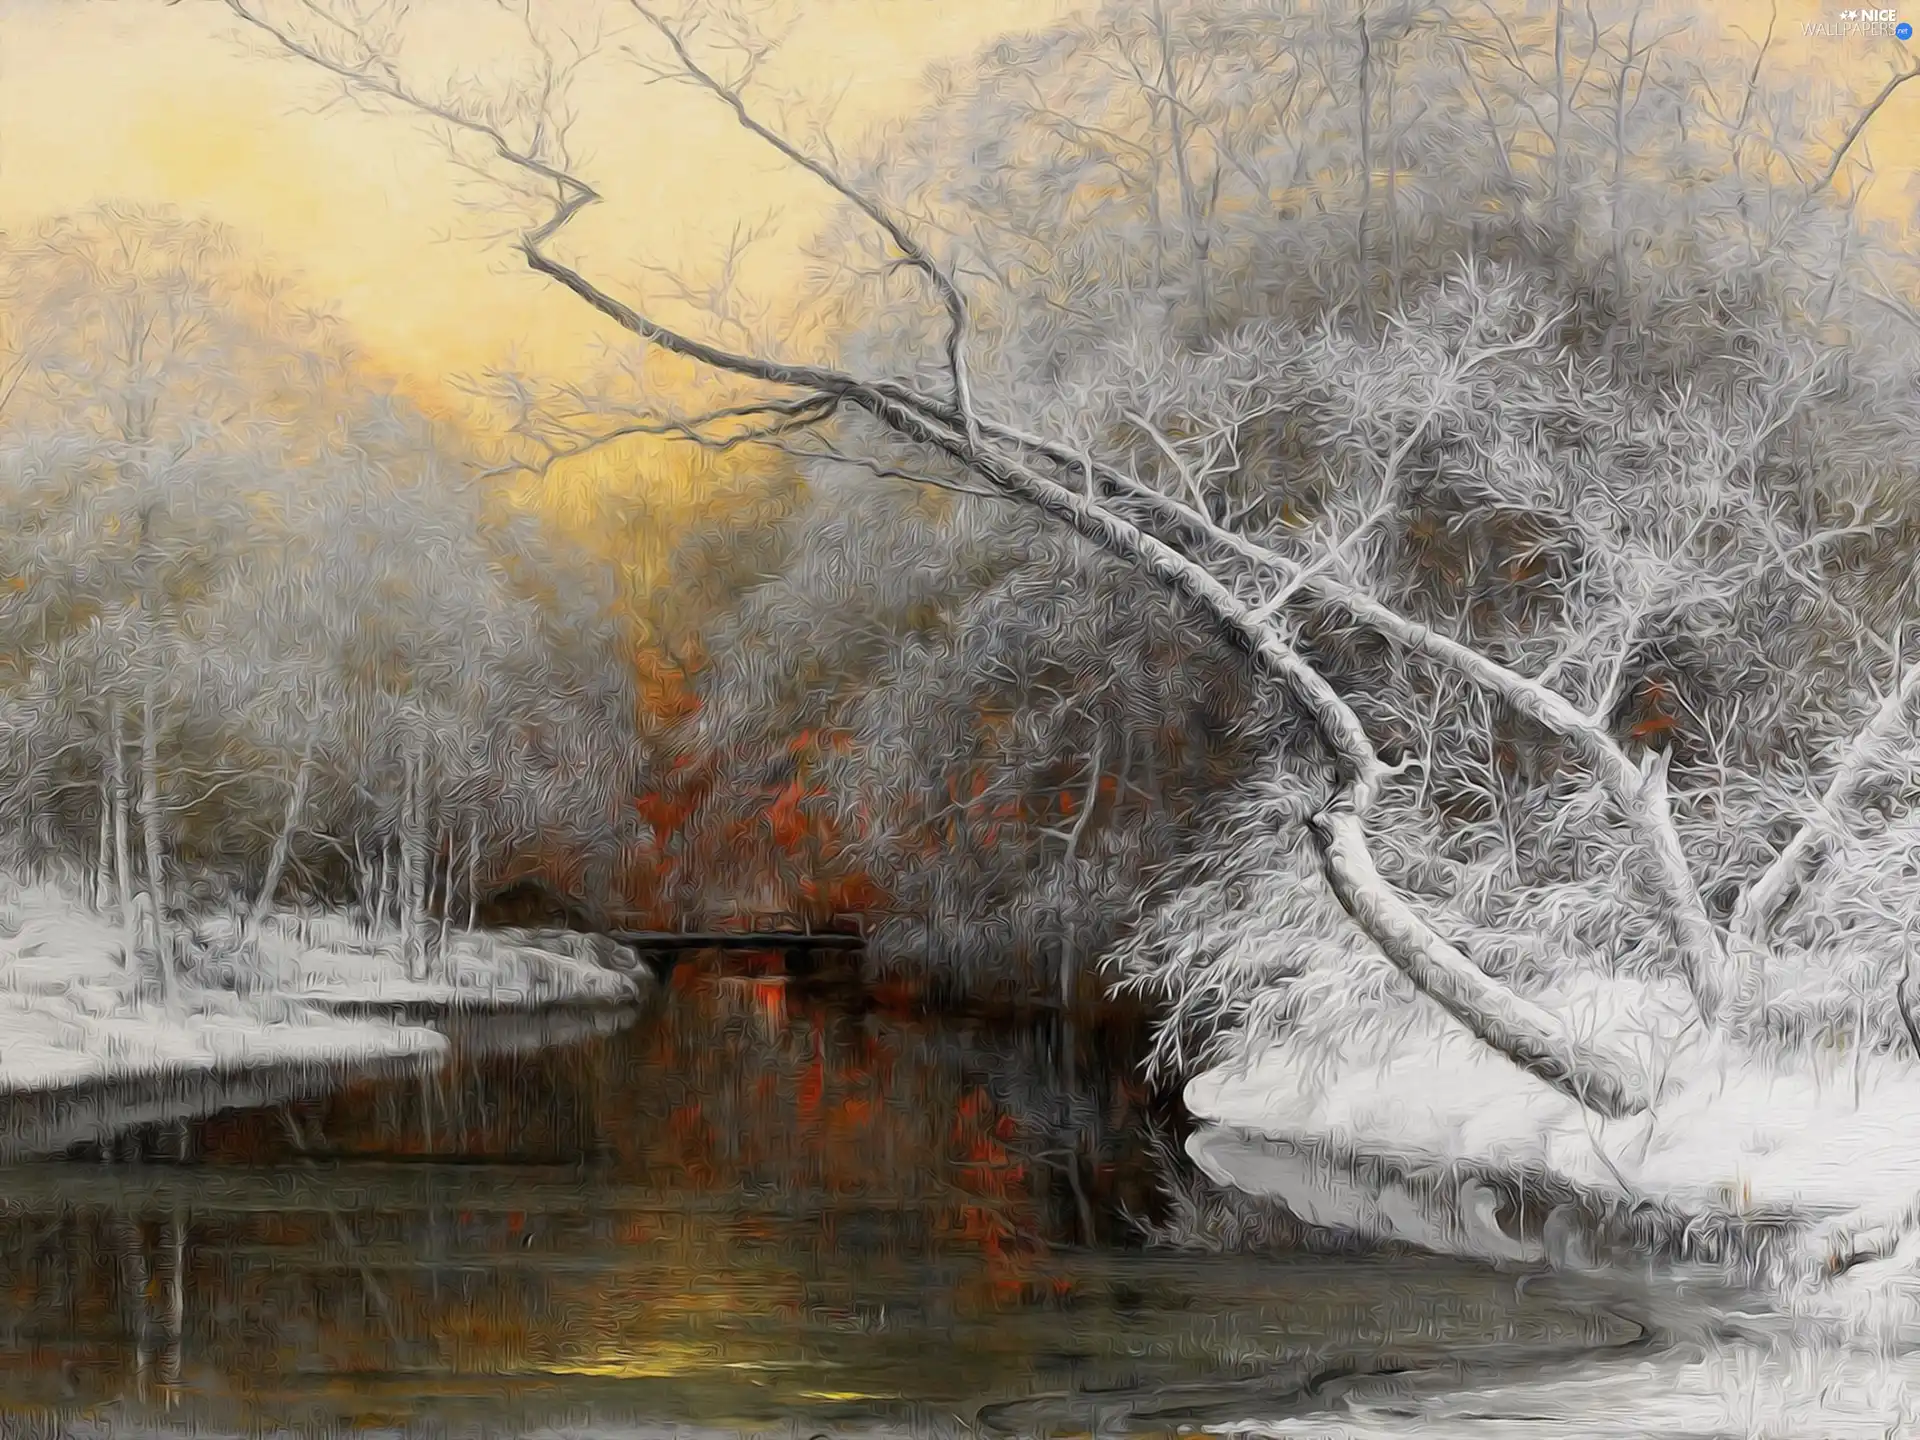 viewes, picture, River, trees, winter